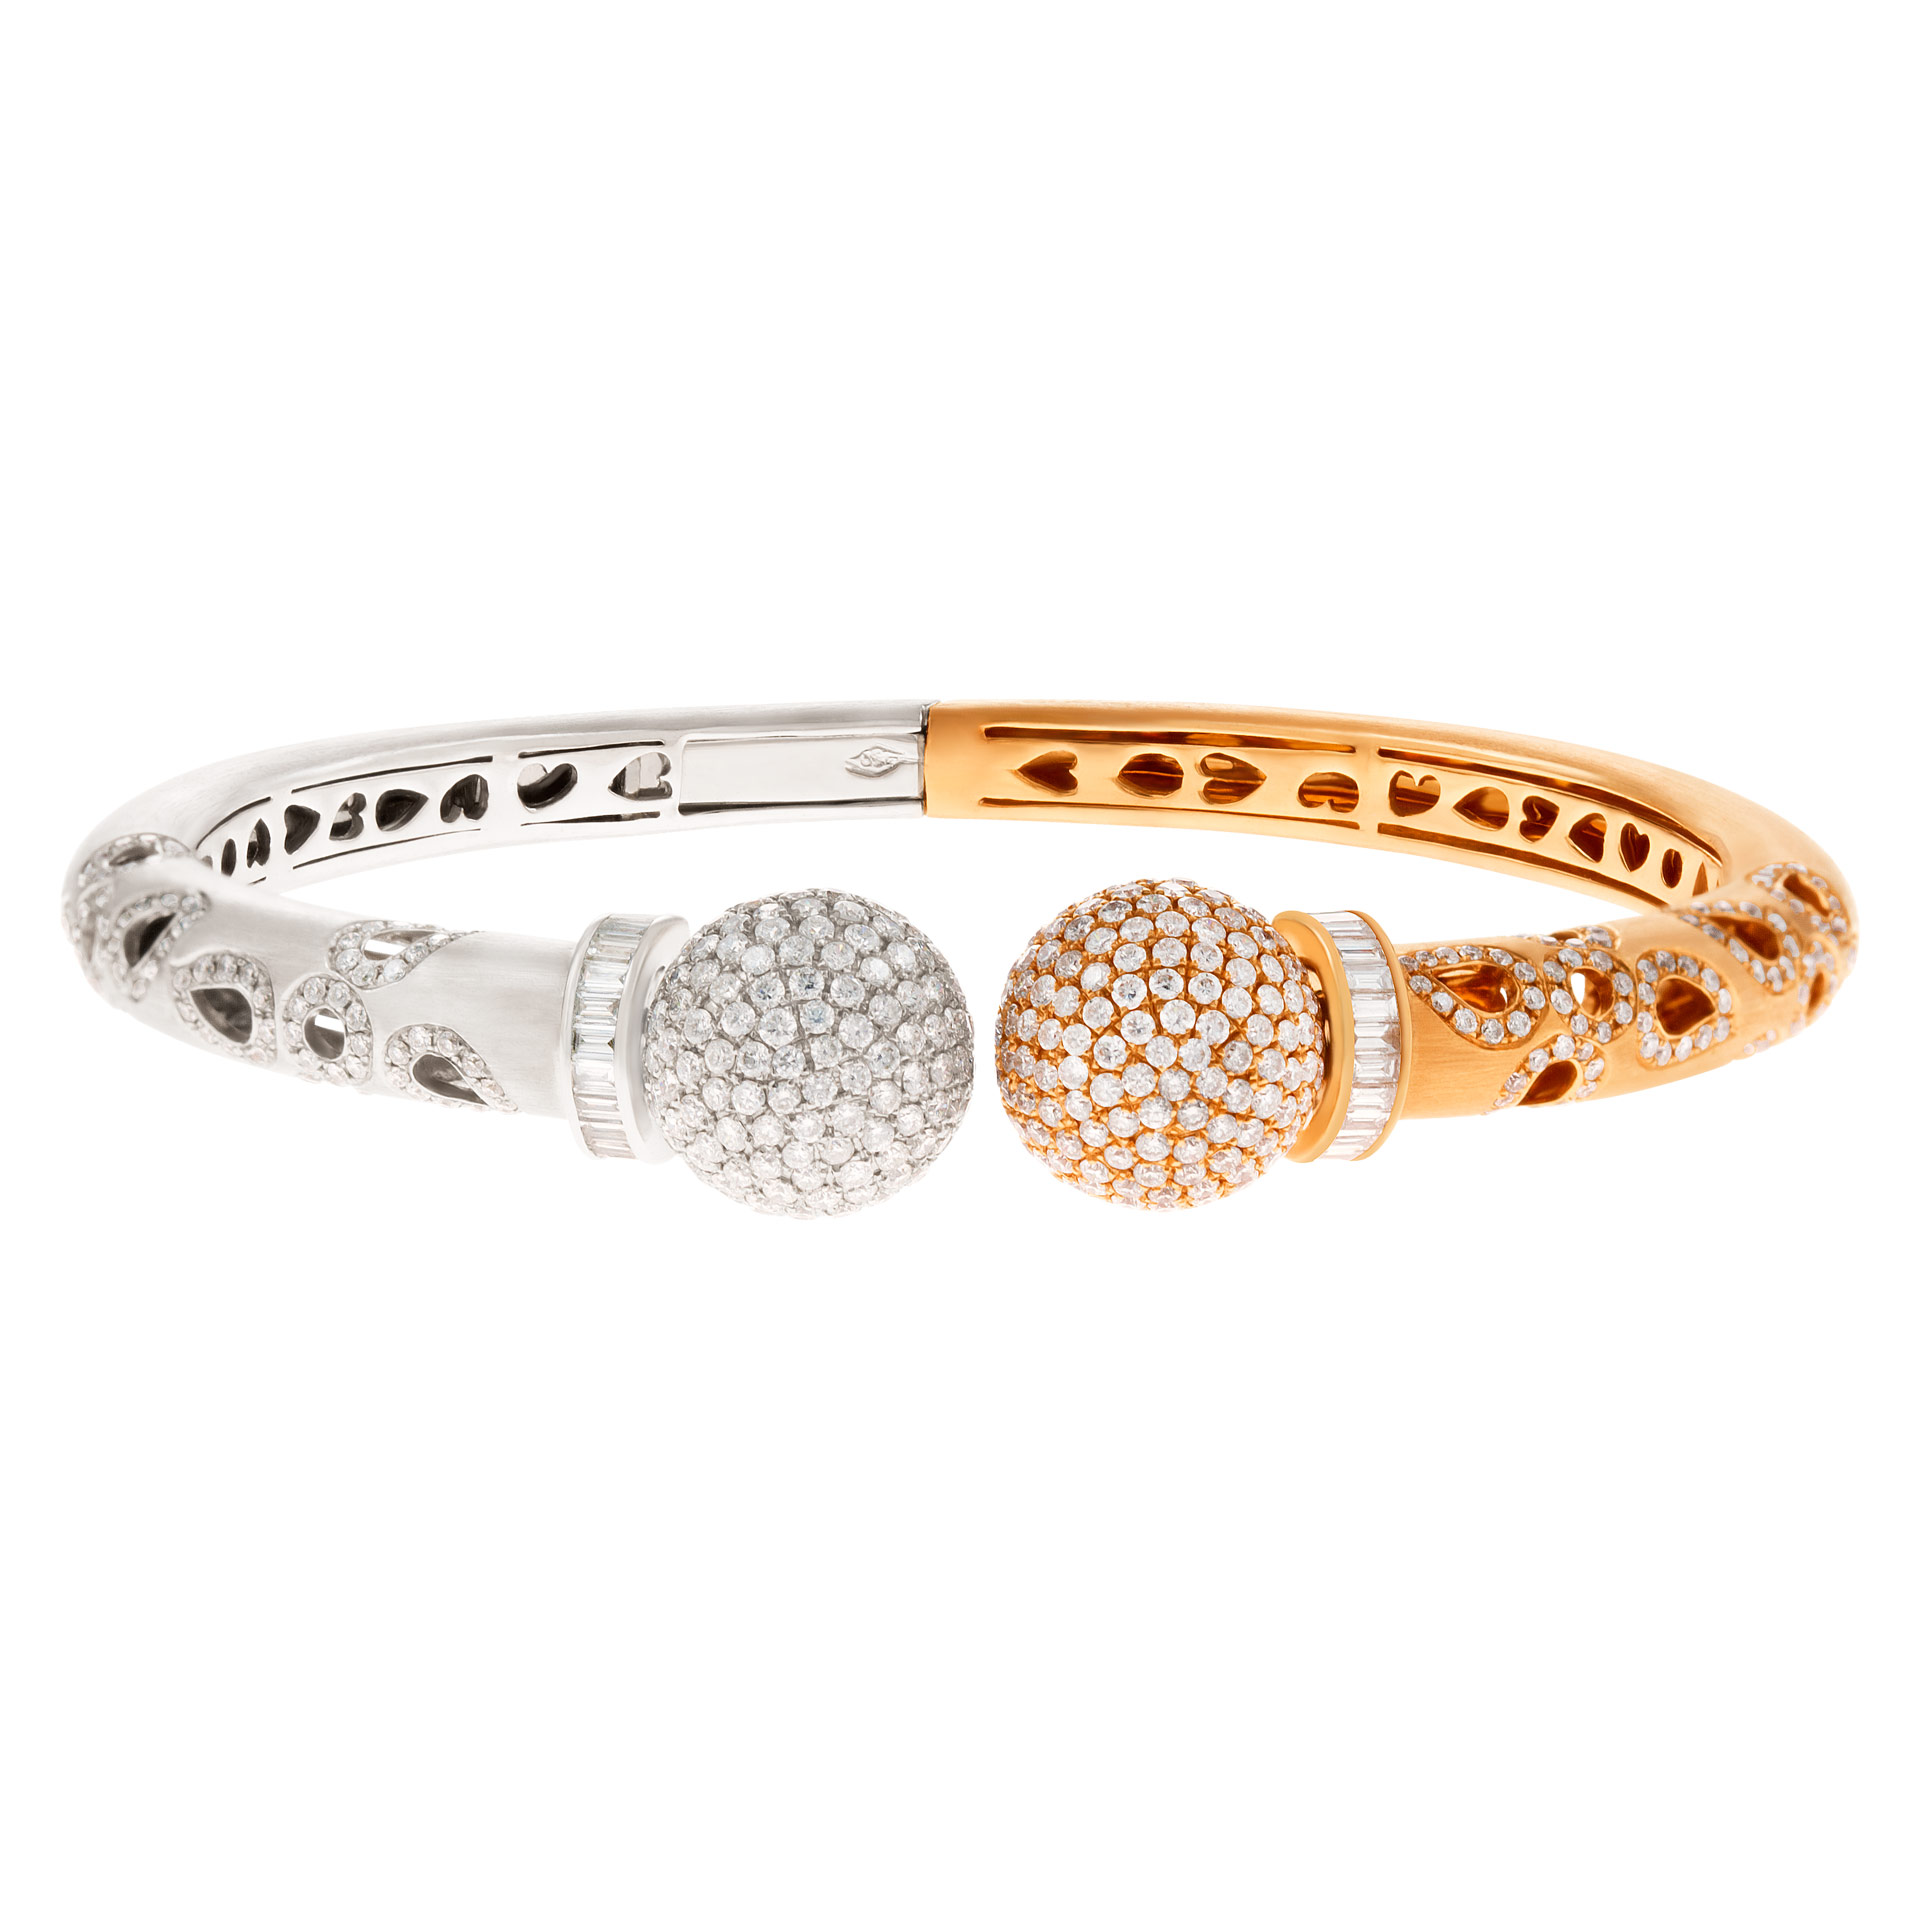 Matte two tone bangle in 18k with diamond accents image 1